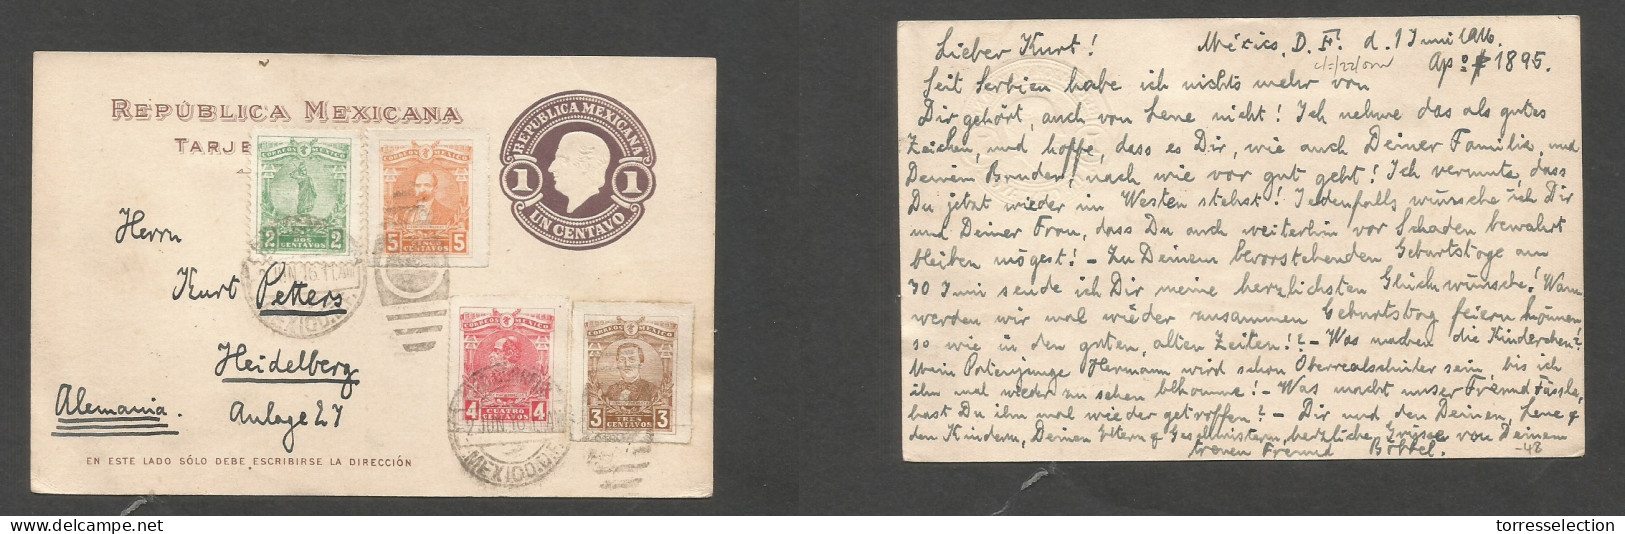 MEXICO - Stationery. 1916 (1-2 June) DF - Germany, Heidelberg 1c Lilac + 4 Diff Adtl, Stat Card, Cds Grill. Fine. Some S - Mexique